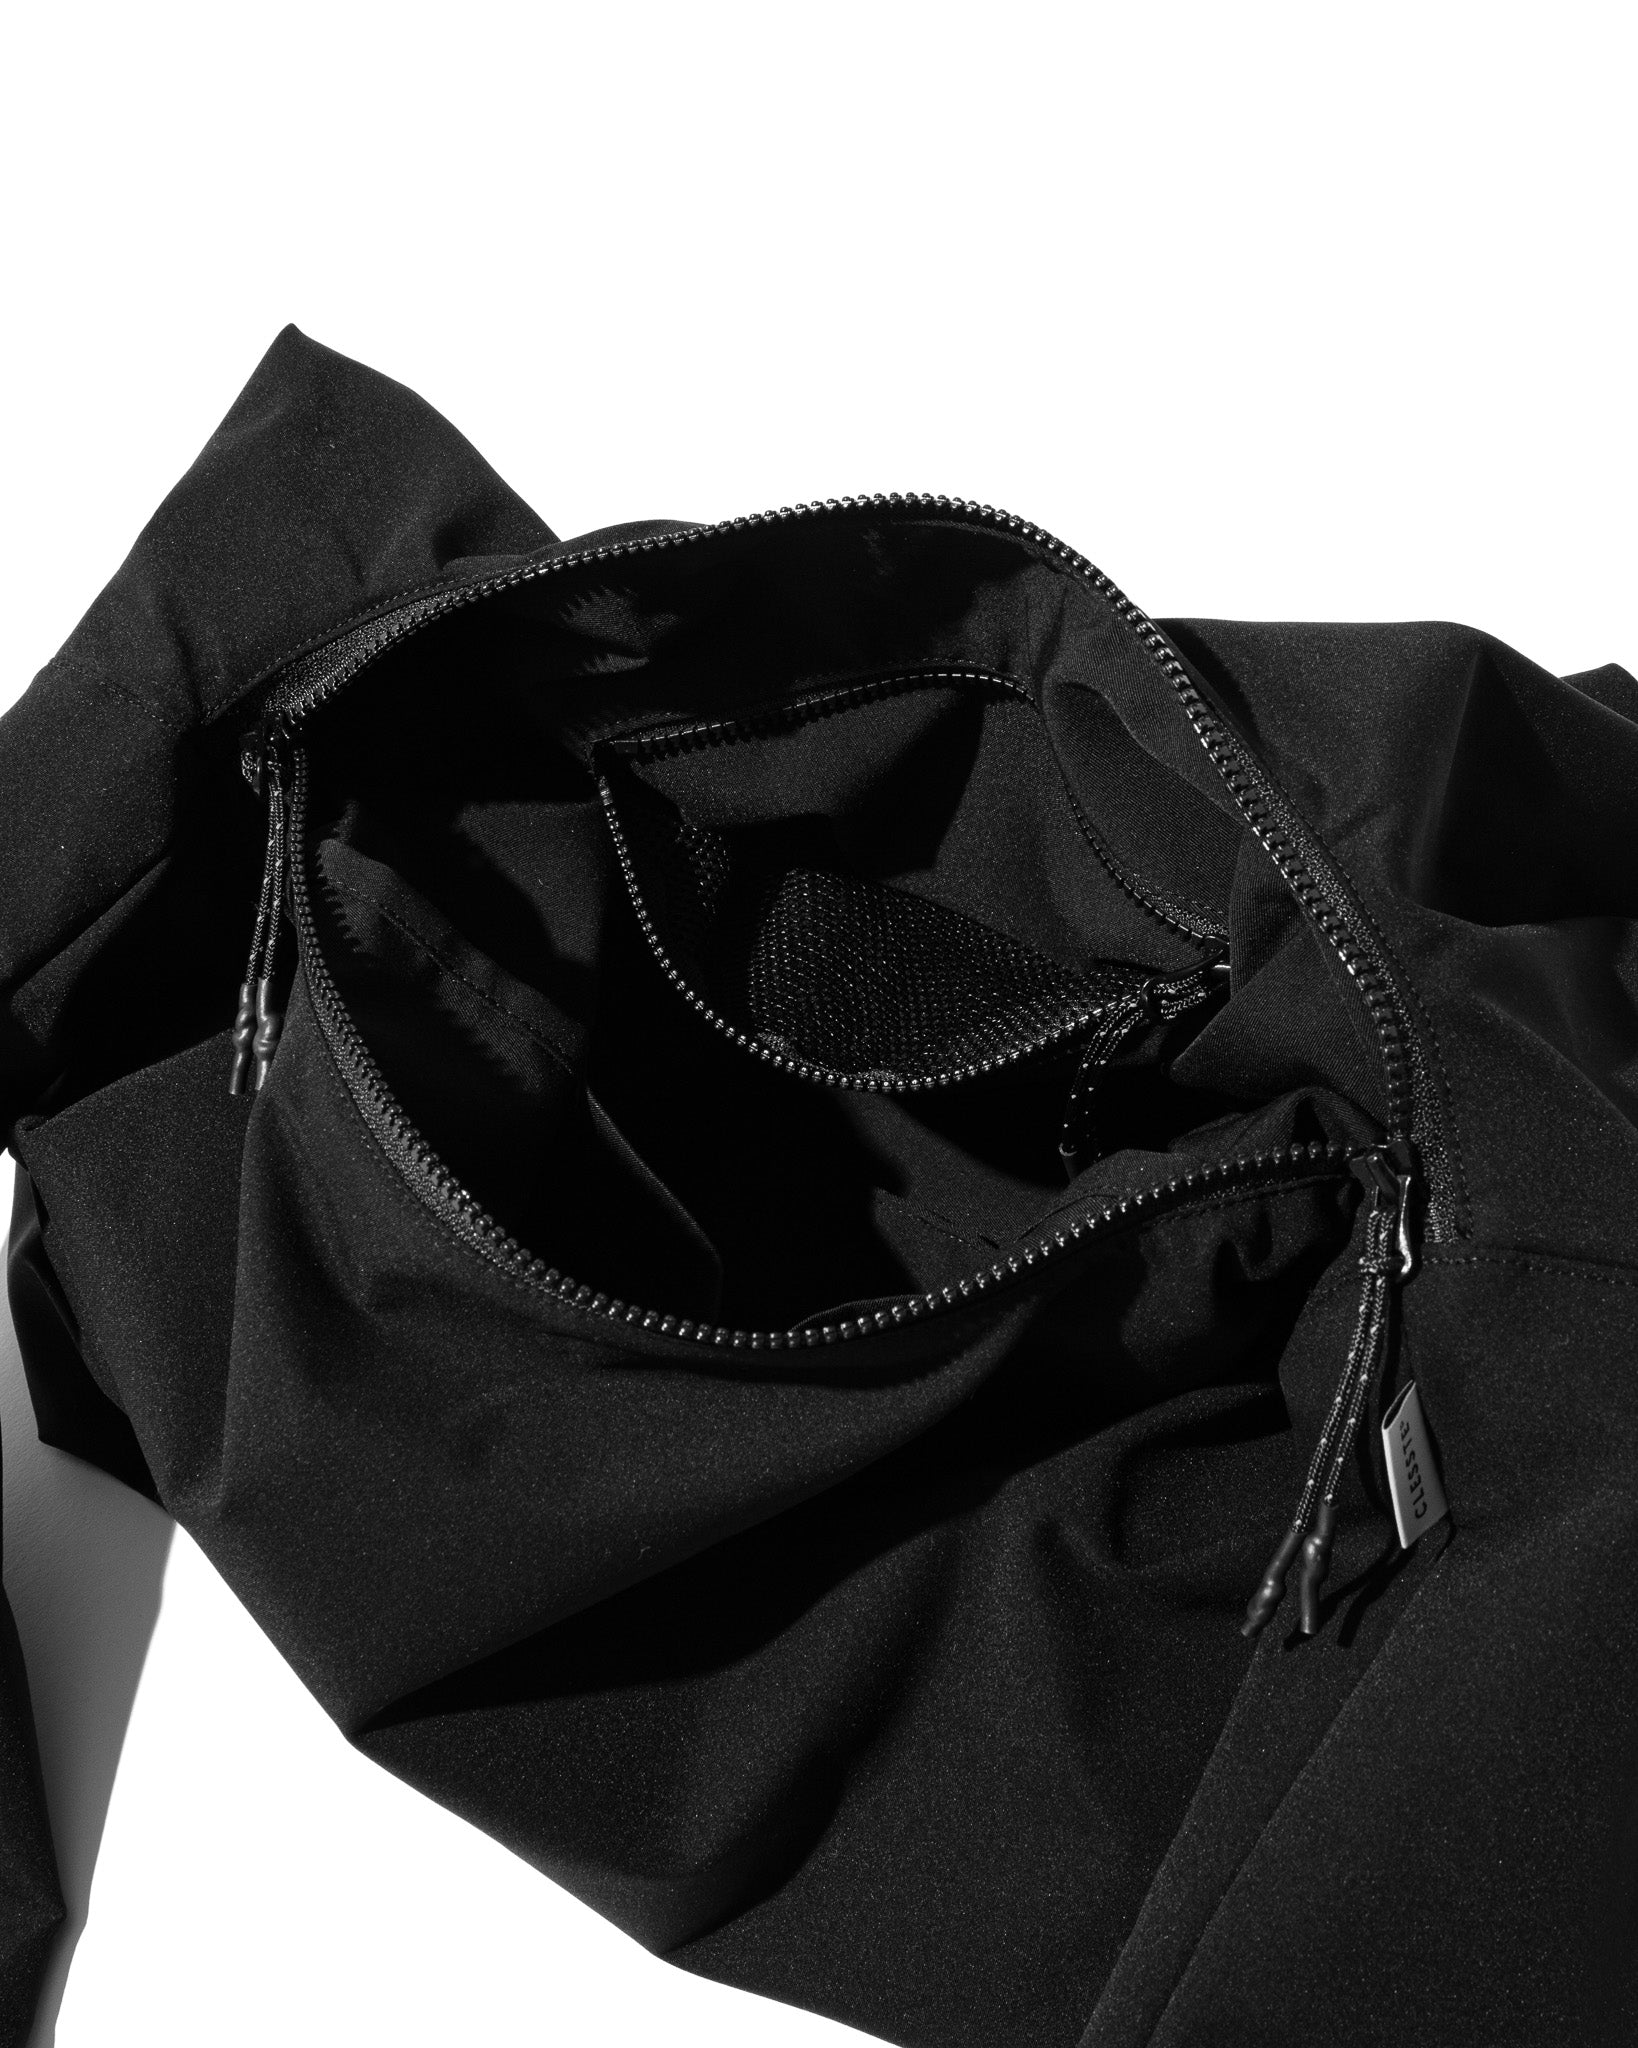 【6.12 WED 20:00- IN STOCK】NEW SOFT SHELL SYSTEM BAG (M).